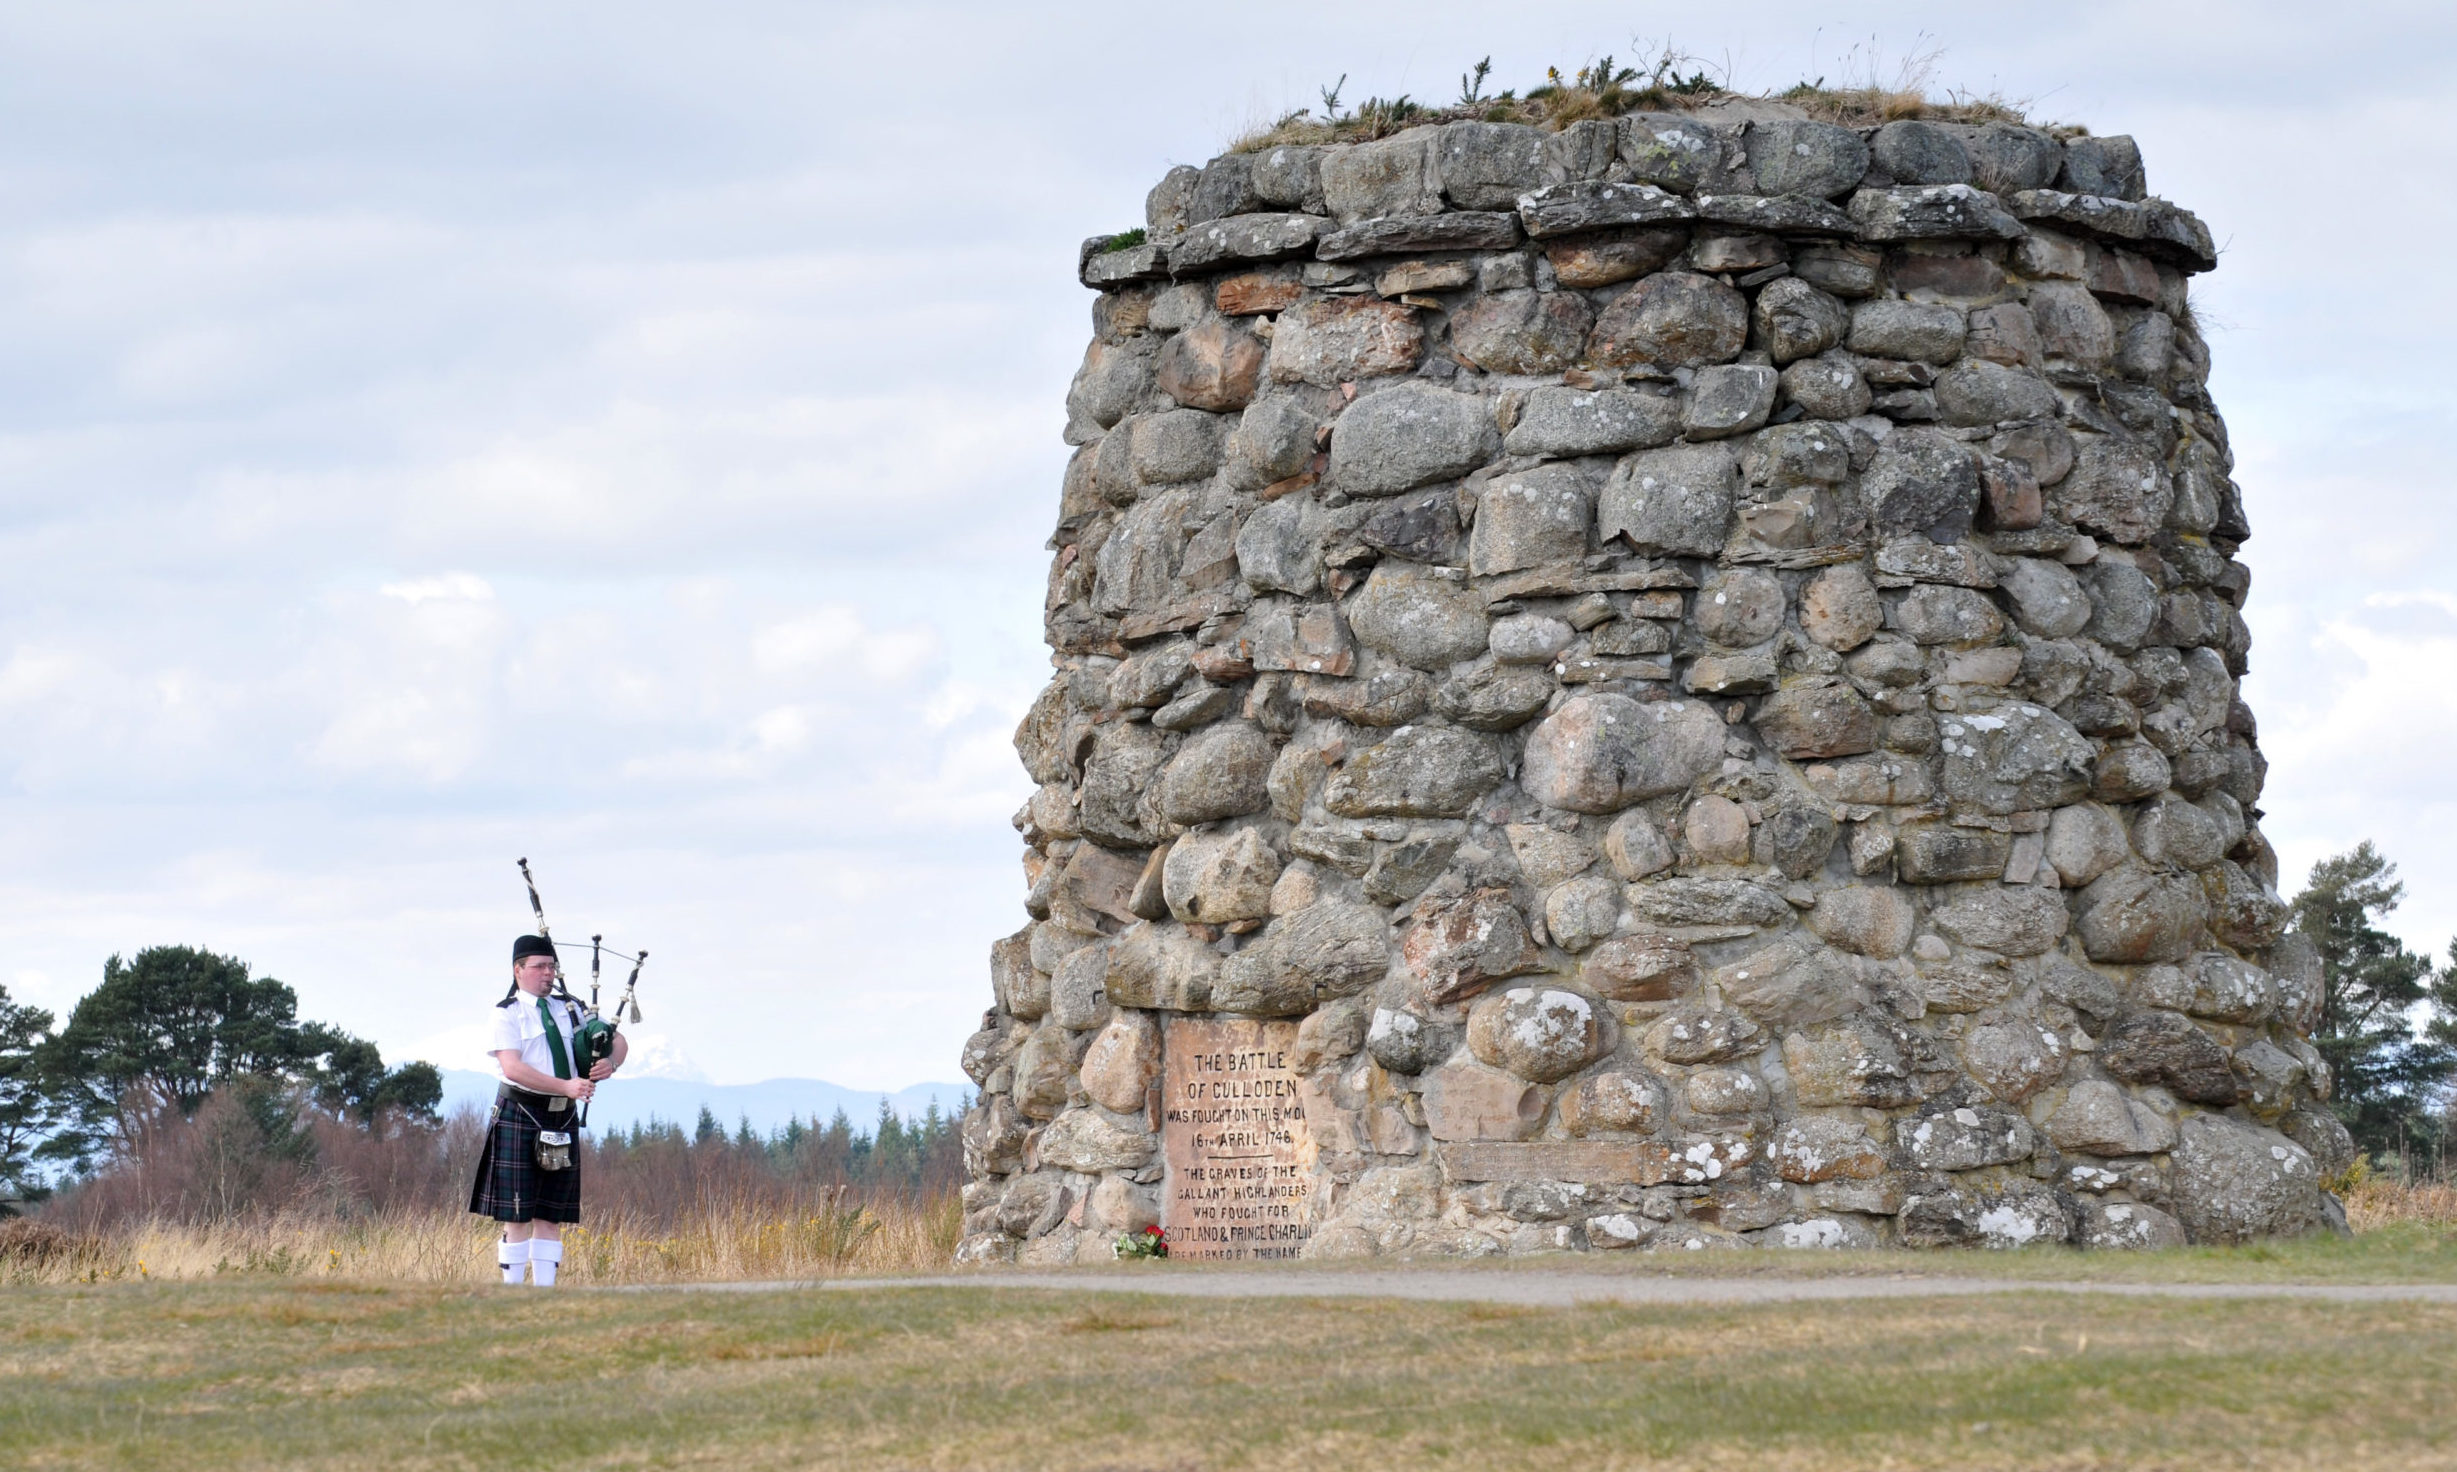 The anniversary of the Battle of Culloden will be marked with a series of events this month.